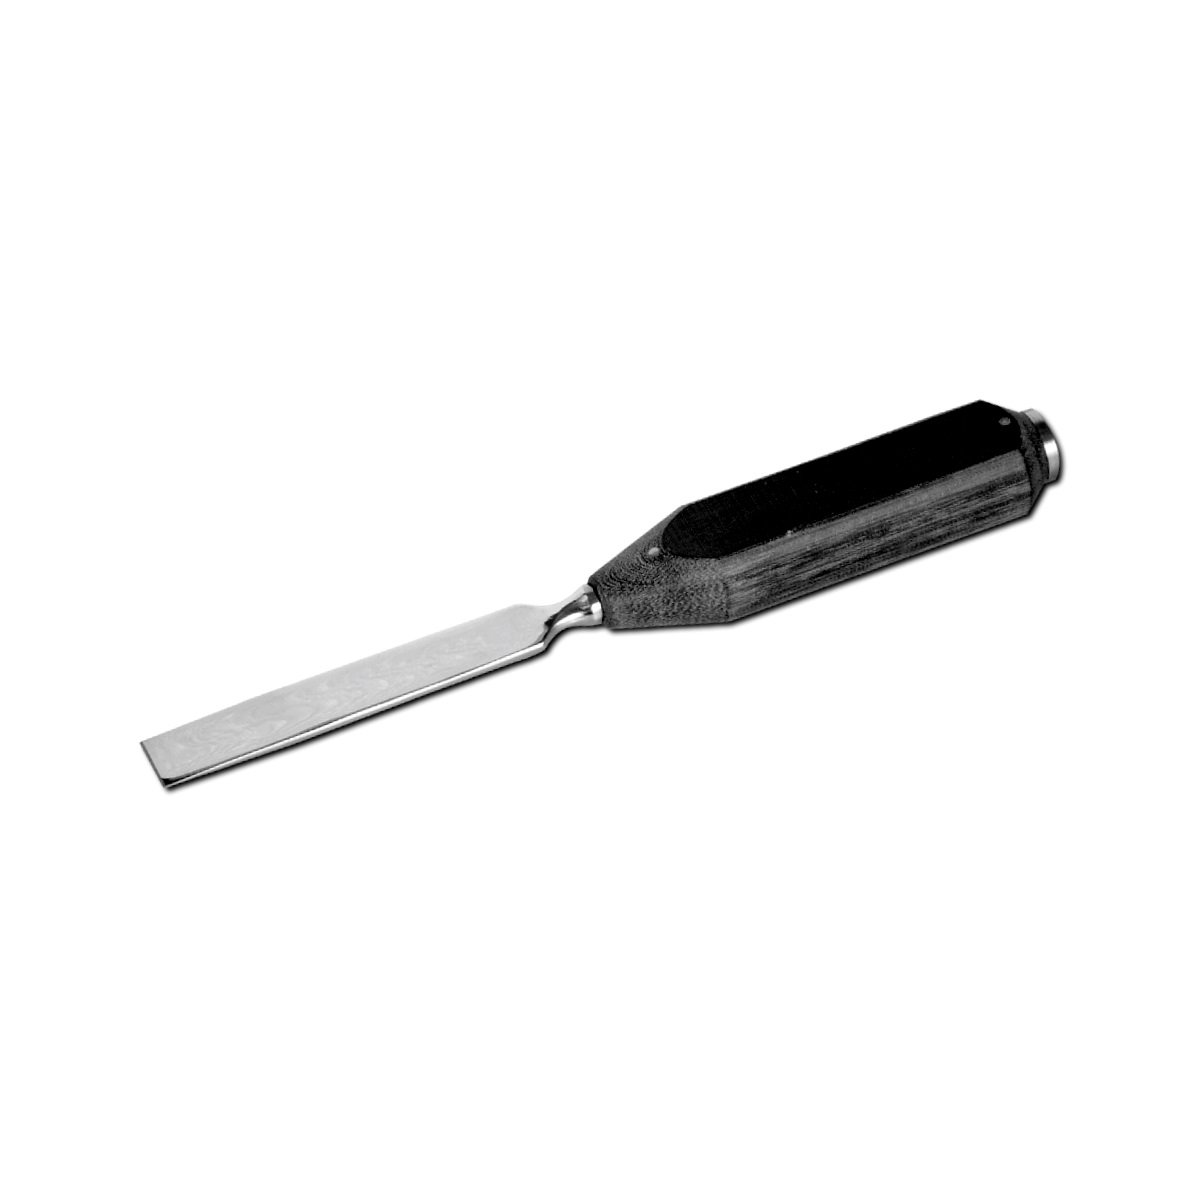 Osteotome-with-Fibre-Handle-Straight.jpg